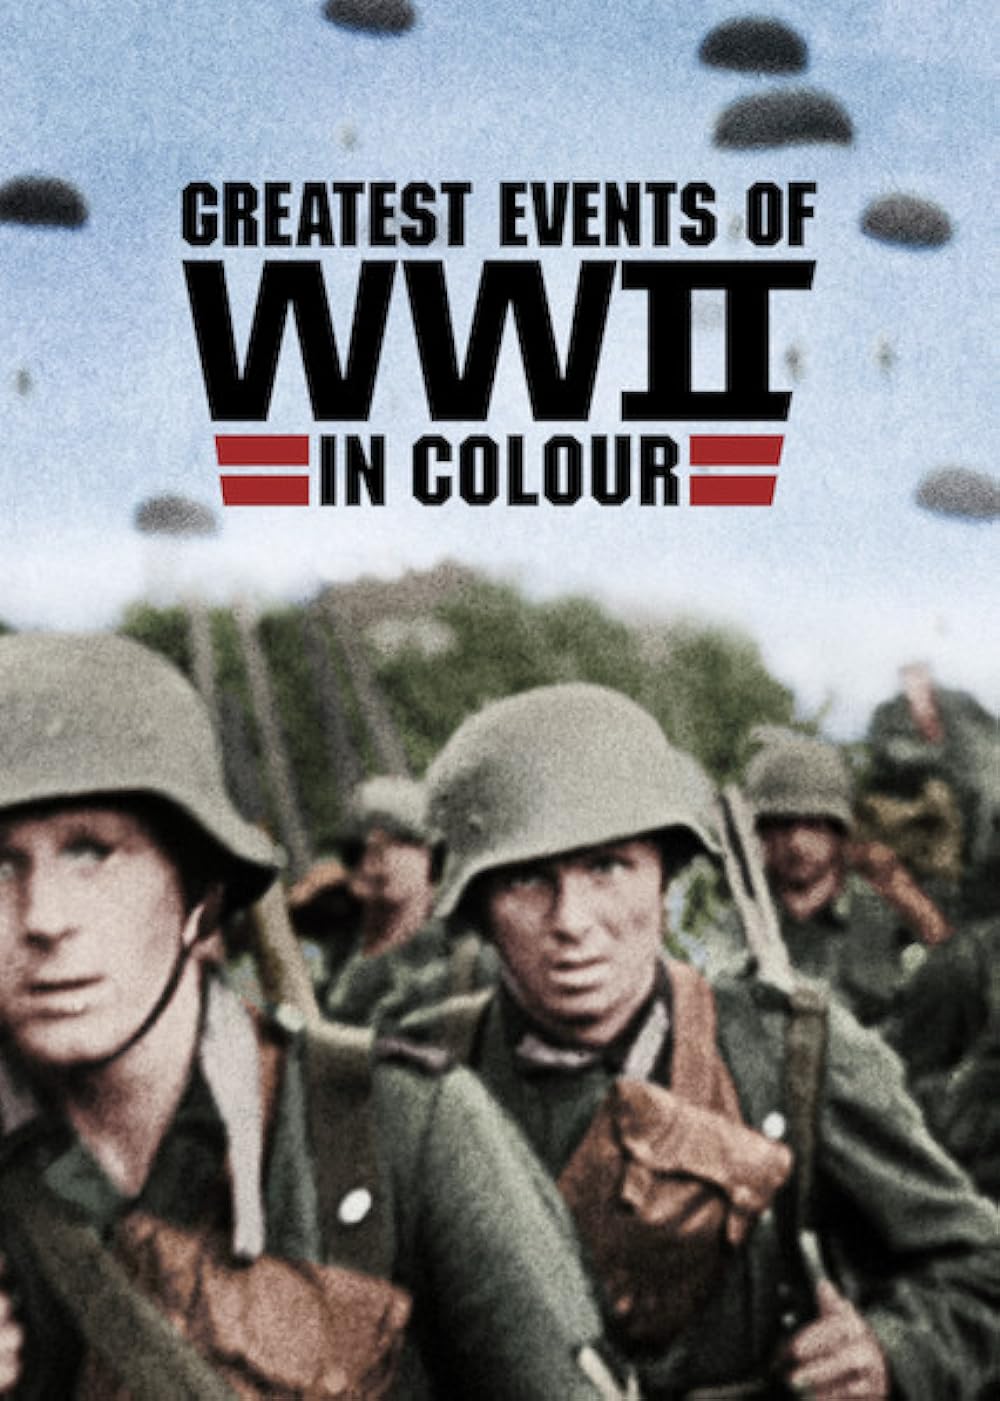 Greatest Events of WWII in Colour (2019) S1 EP8 Dresden Firestorm 128Kbps 25Fps 48Khz 2.0Ch DD+ NF E-AC3 Turkish Audio TAC